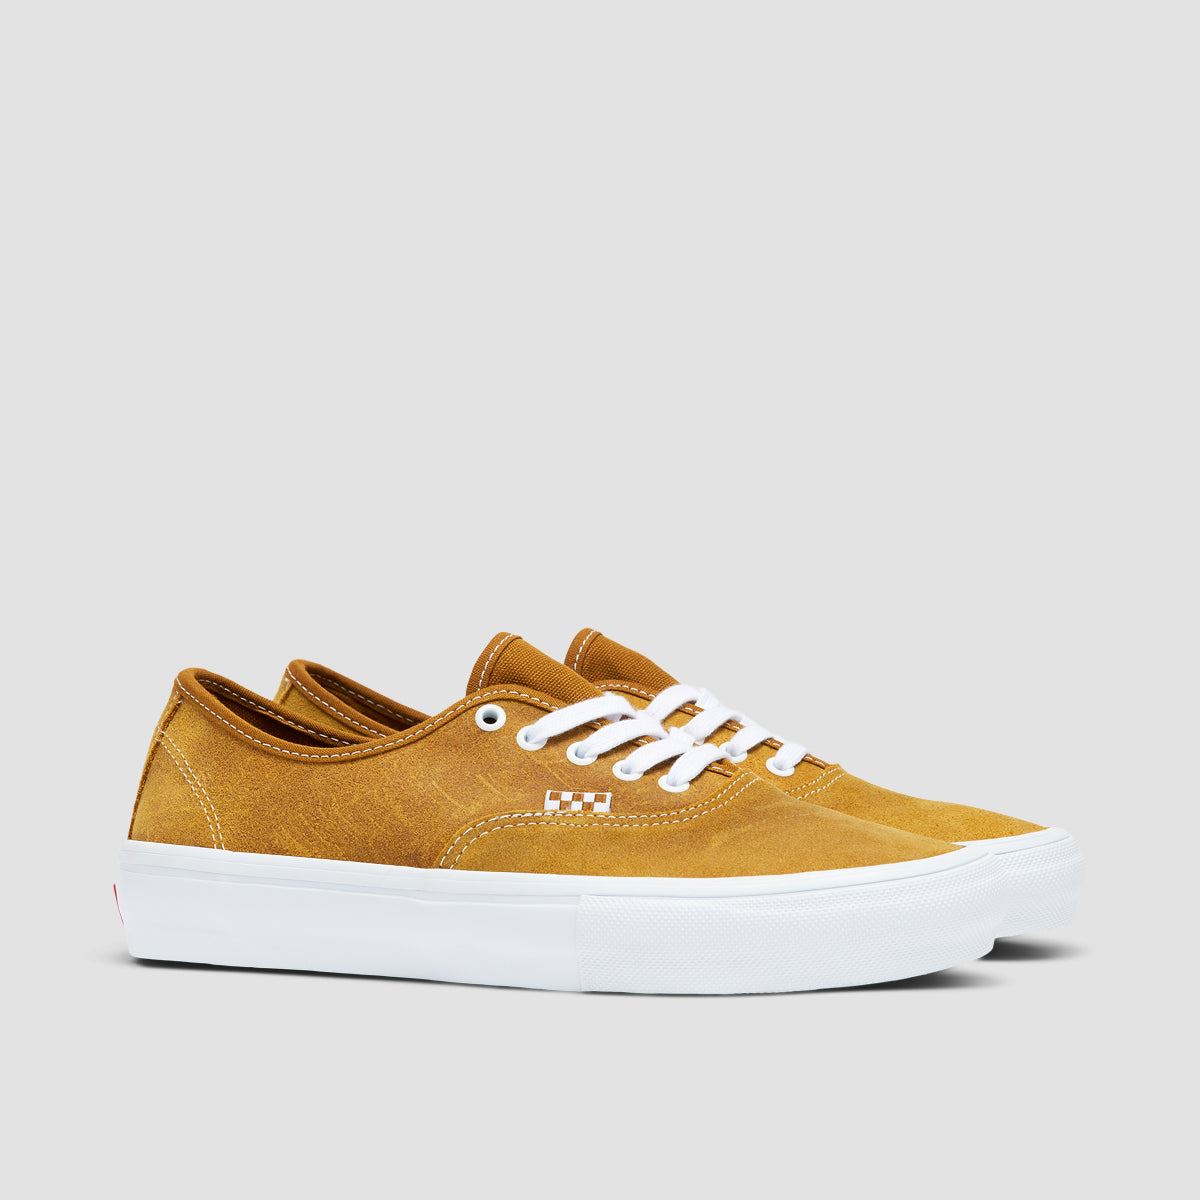 Vans Skate Authentic Shoes - Leather Golden Brown